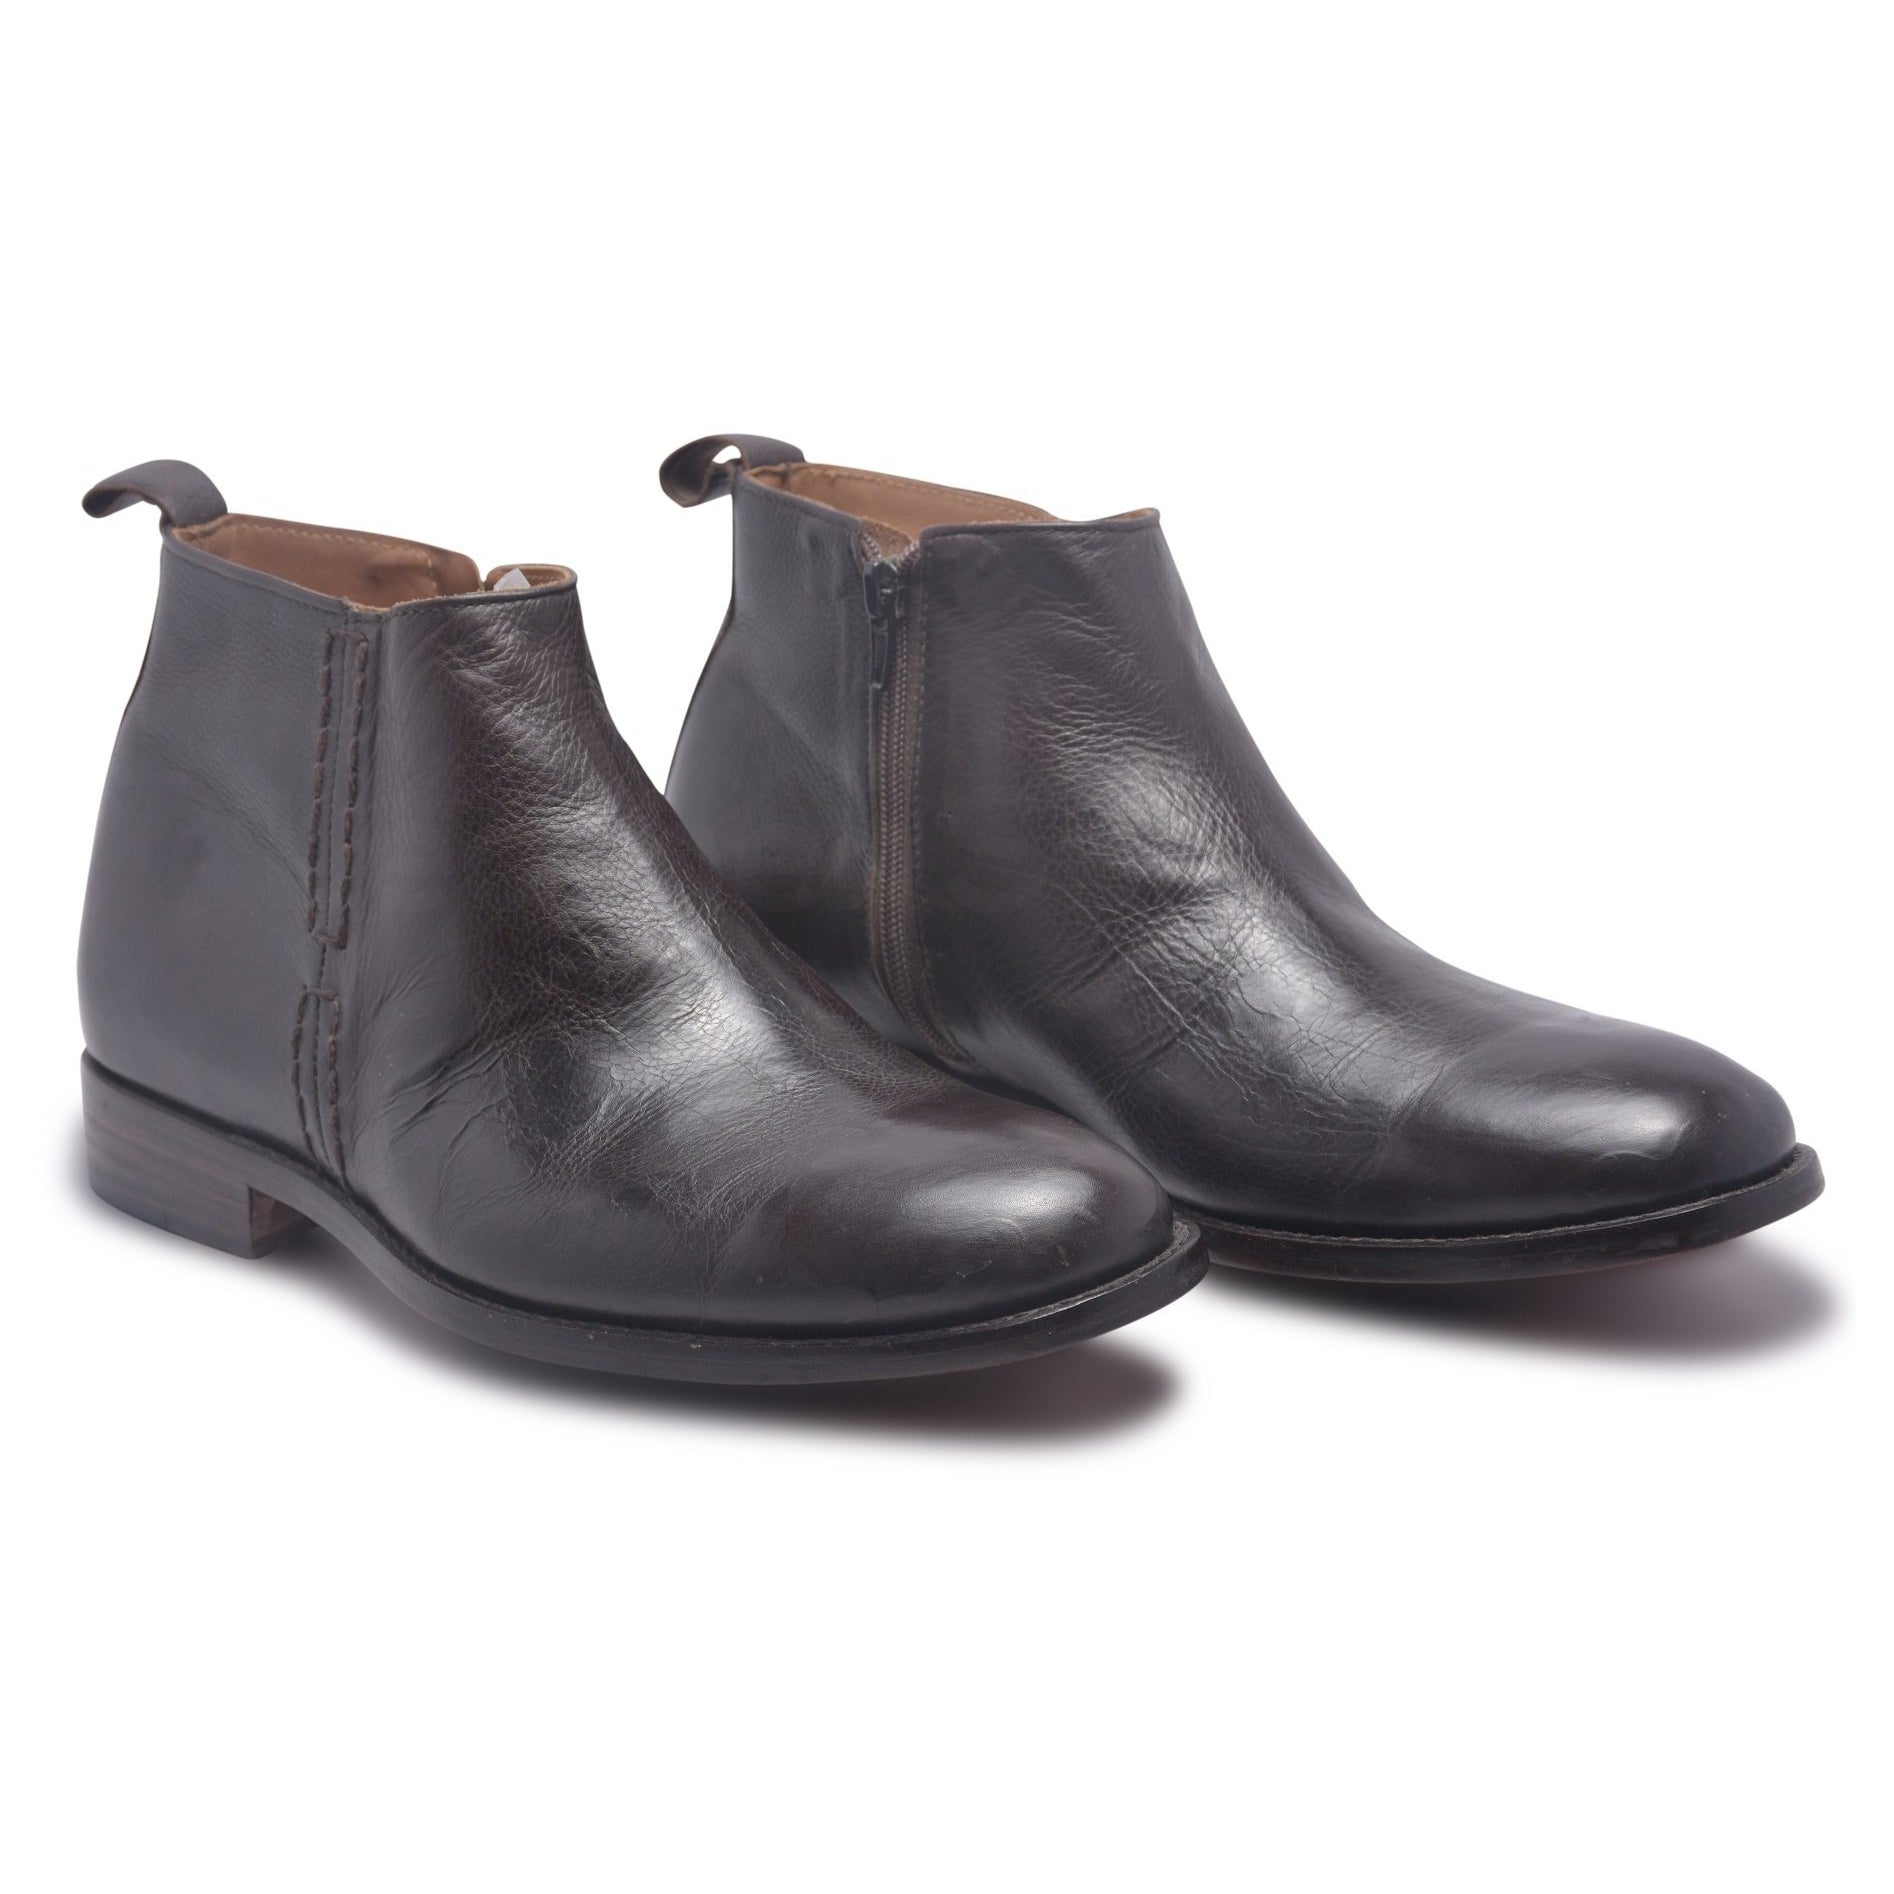 Mens Dark Brown Boots with Zipper on side - Leather Skin Shop